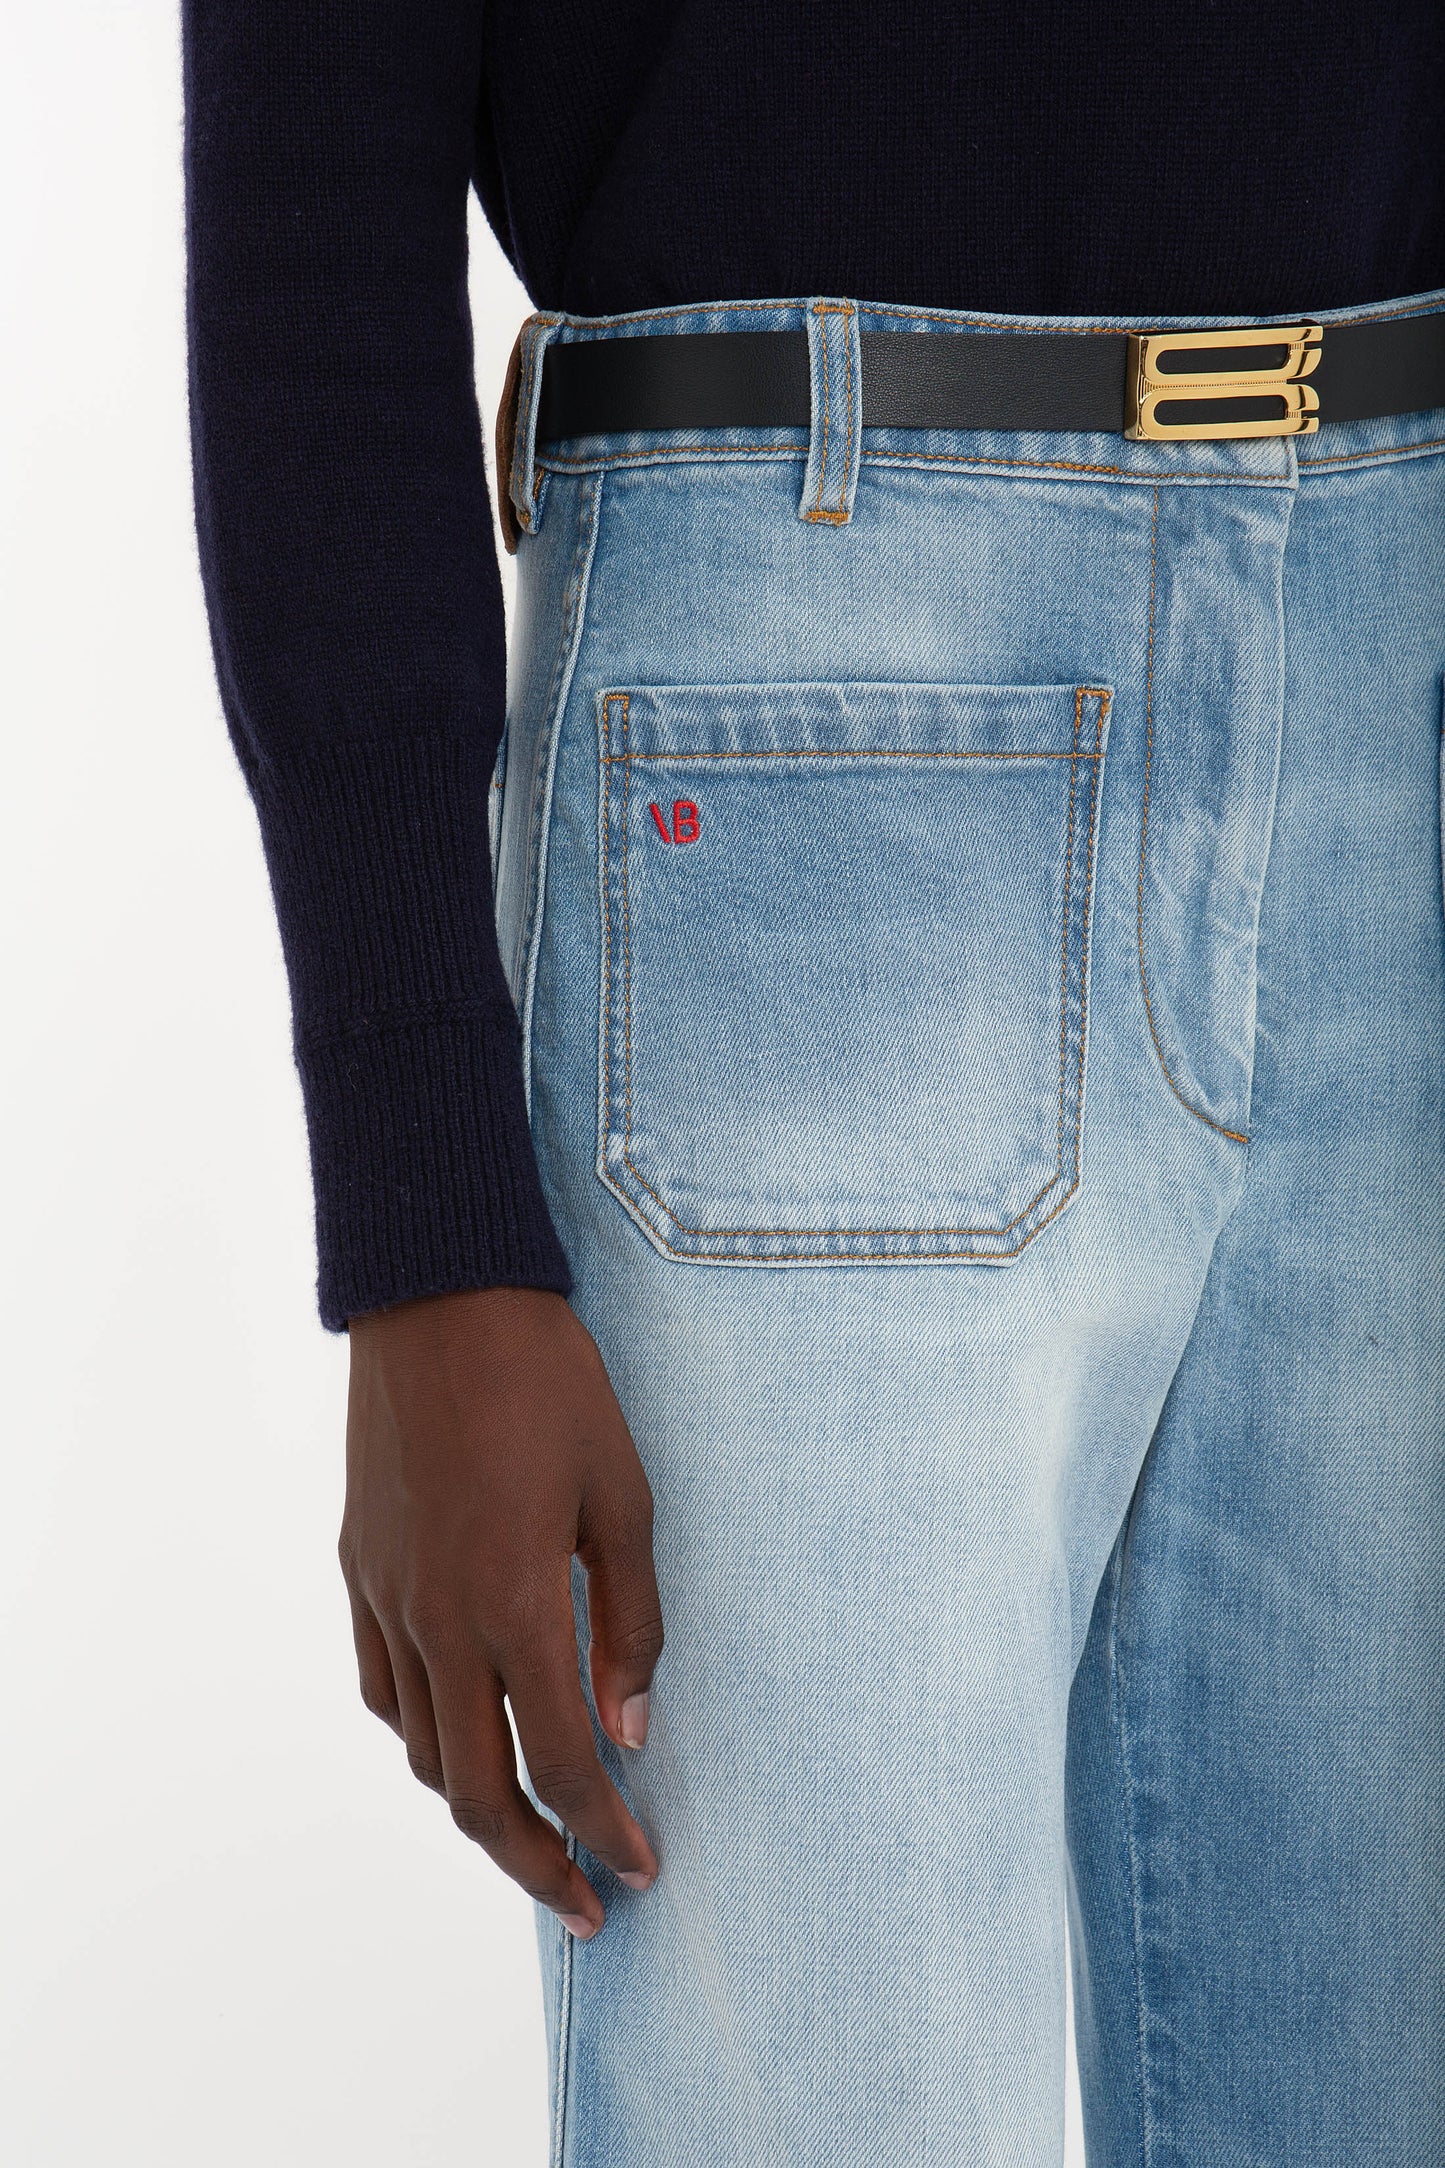 Person wearing Victoria Beckham Alina High Waisted Jean In Light Summer Wash in a vintage denim style with a red logo on the back pocket, a black belt with a gold buckle, and a dark long-sleeve top.